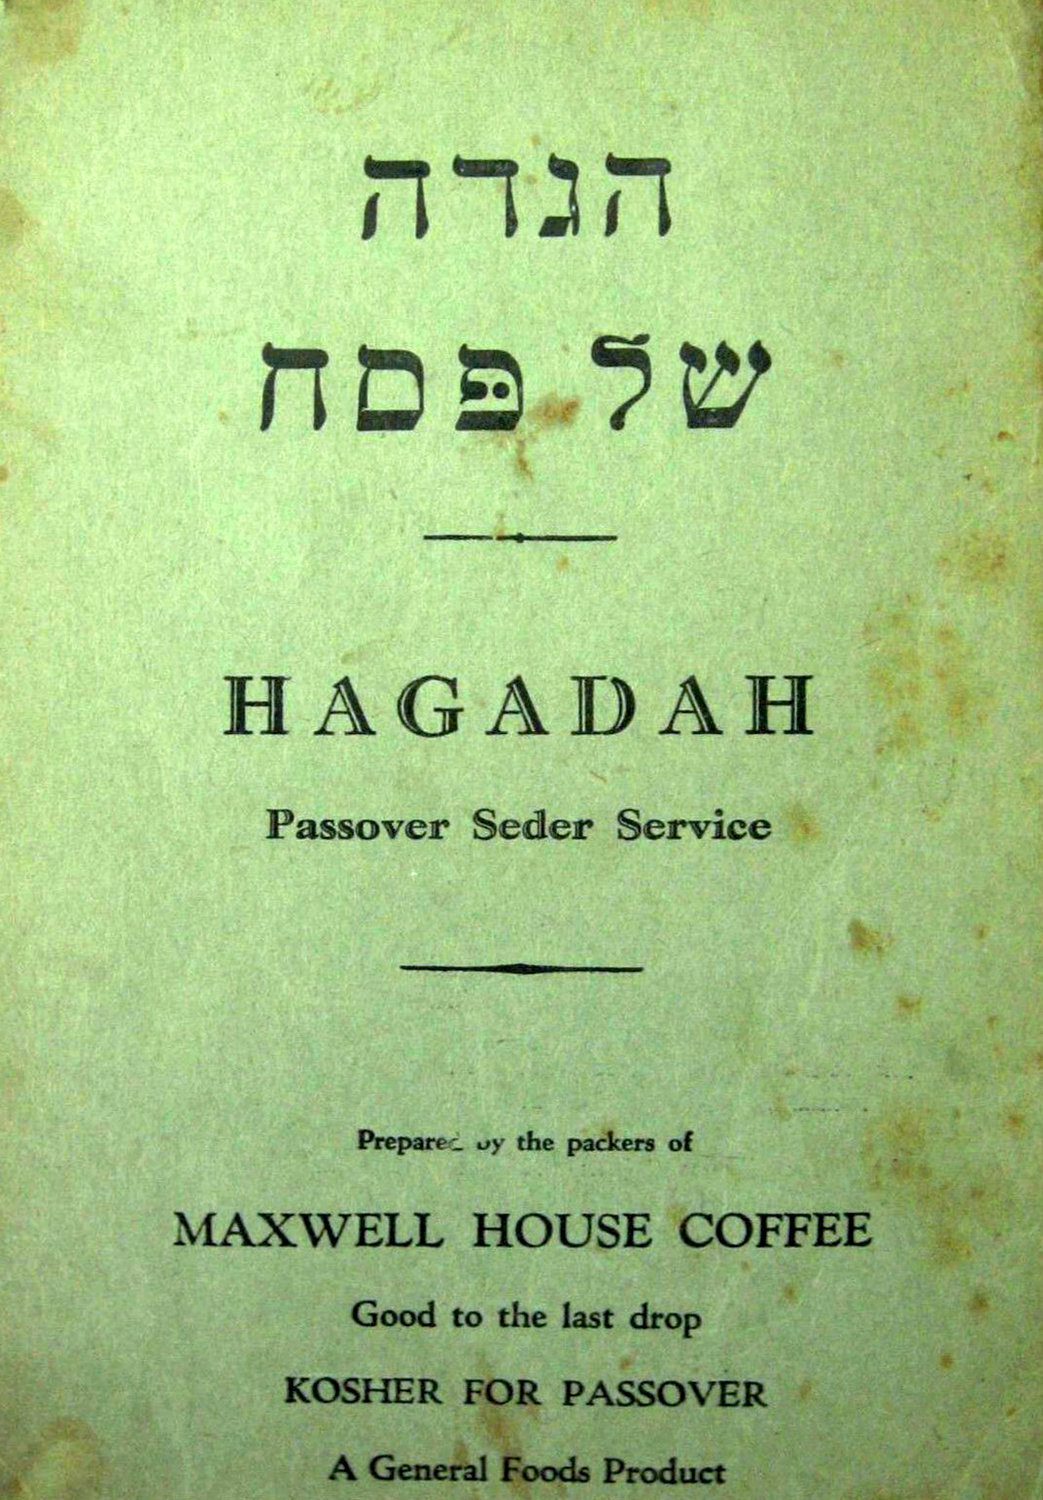 The 1933 edition of the Maxwell House Coffee Haggadah.